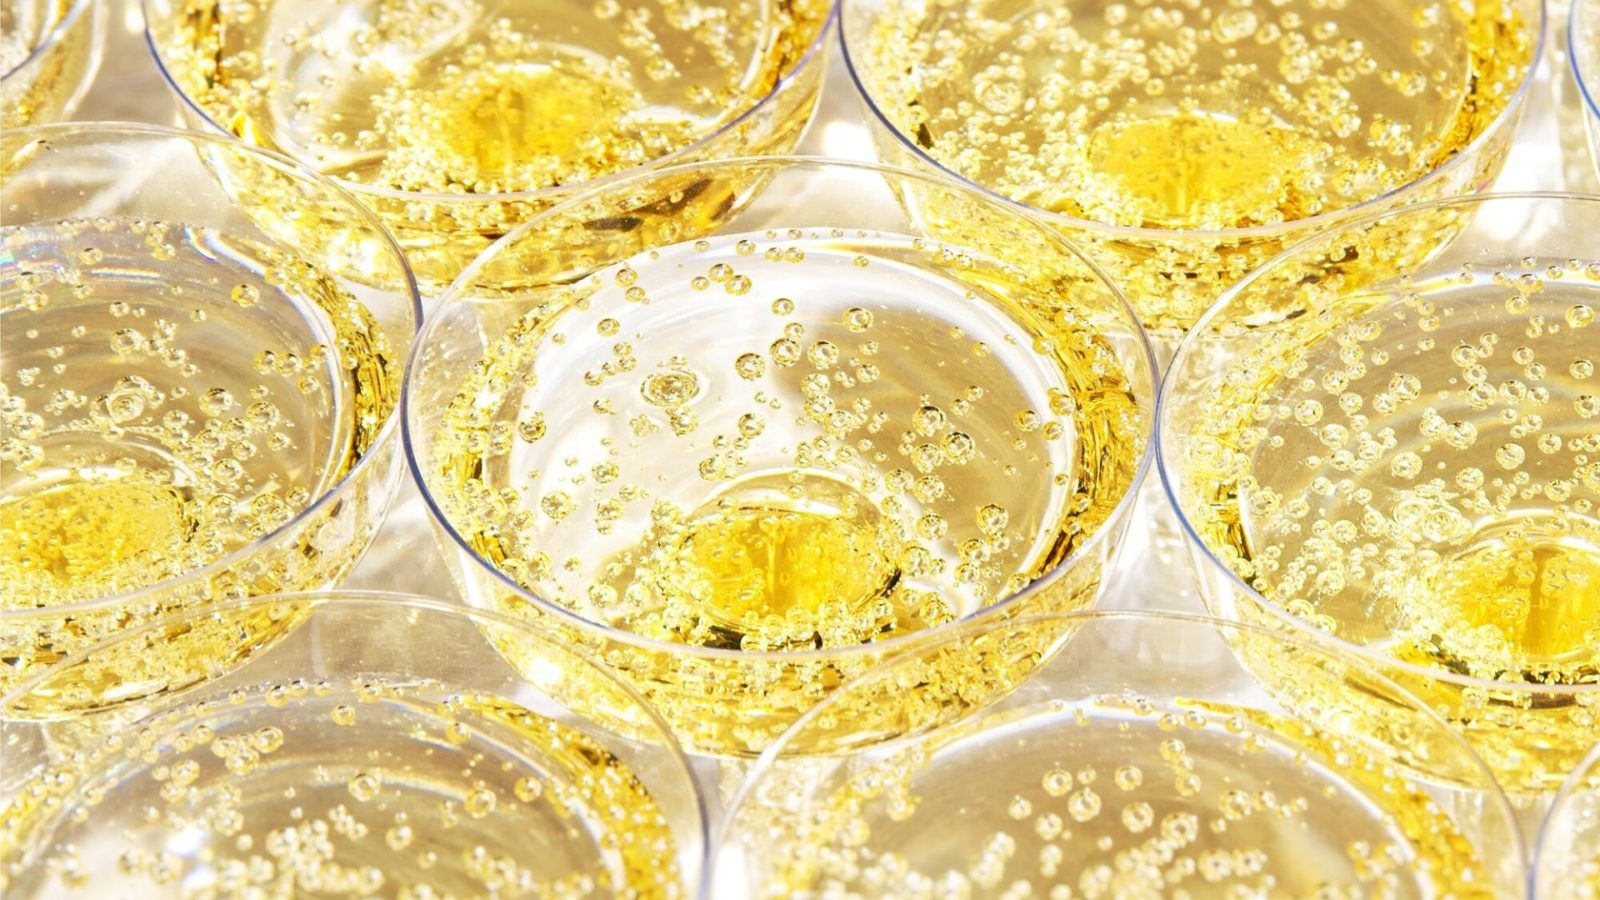 Real Talk: What is the actual difference between sparkling wine and champagne?